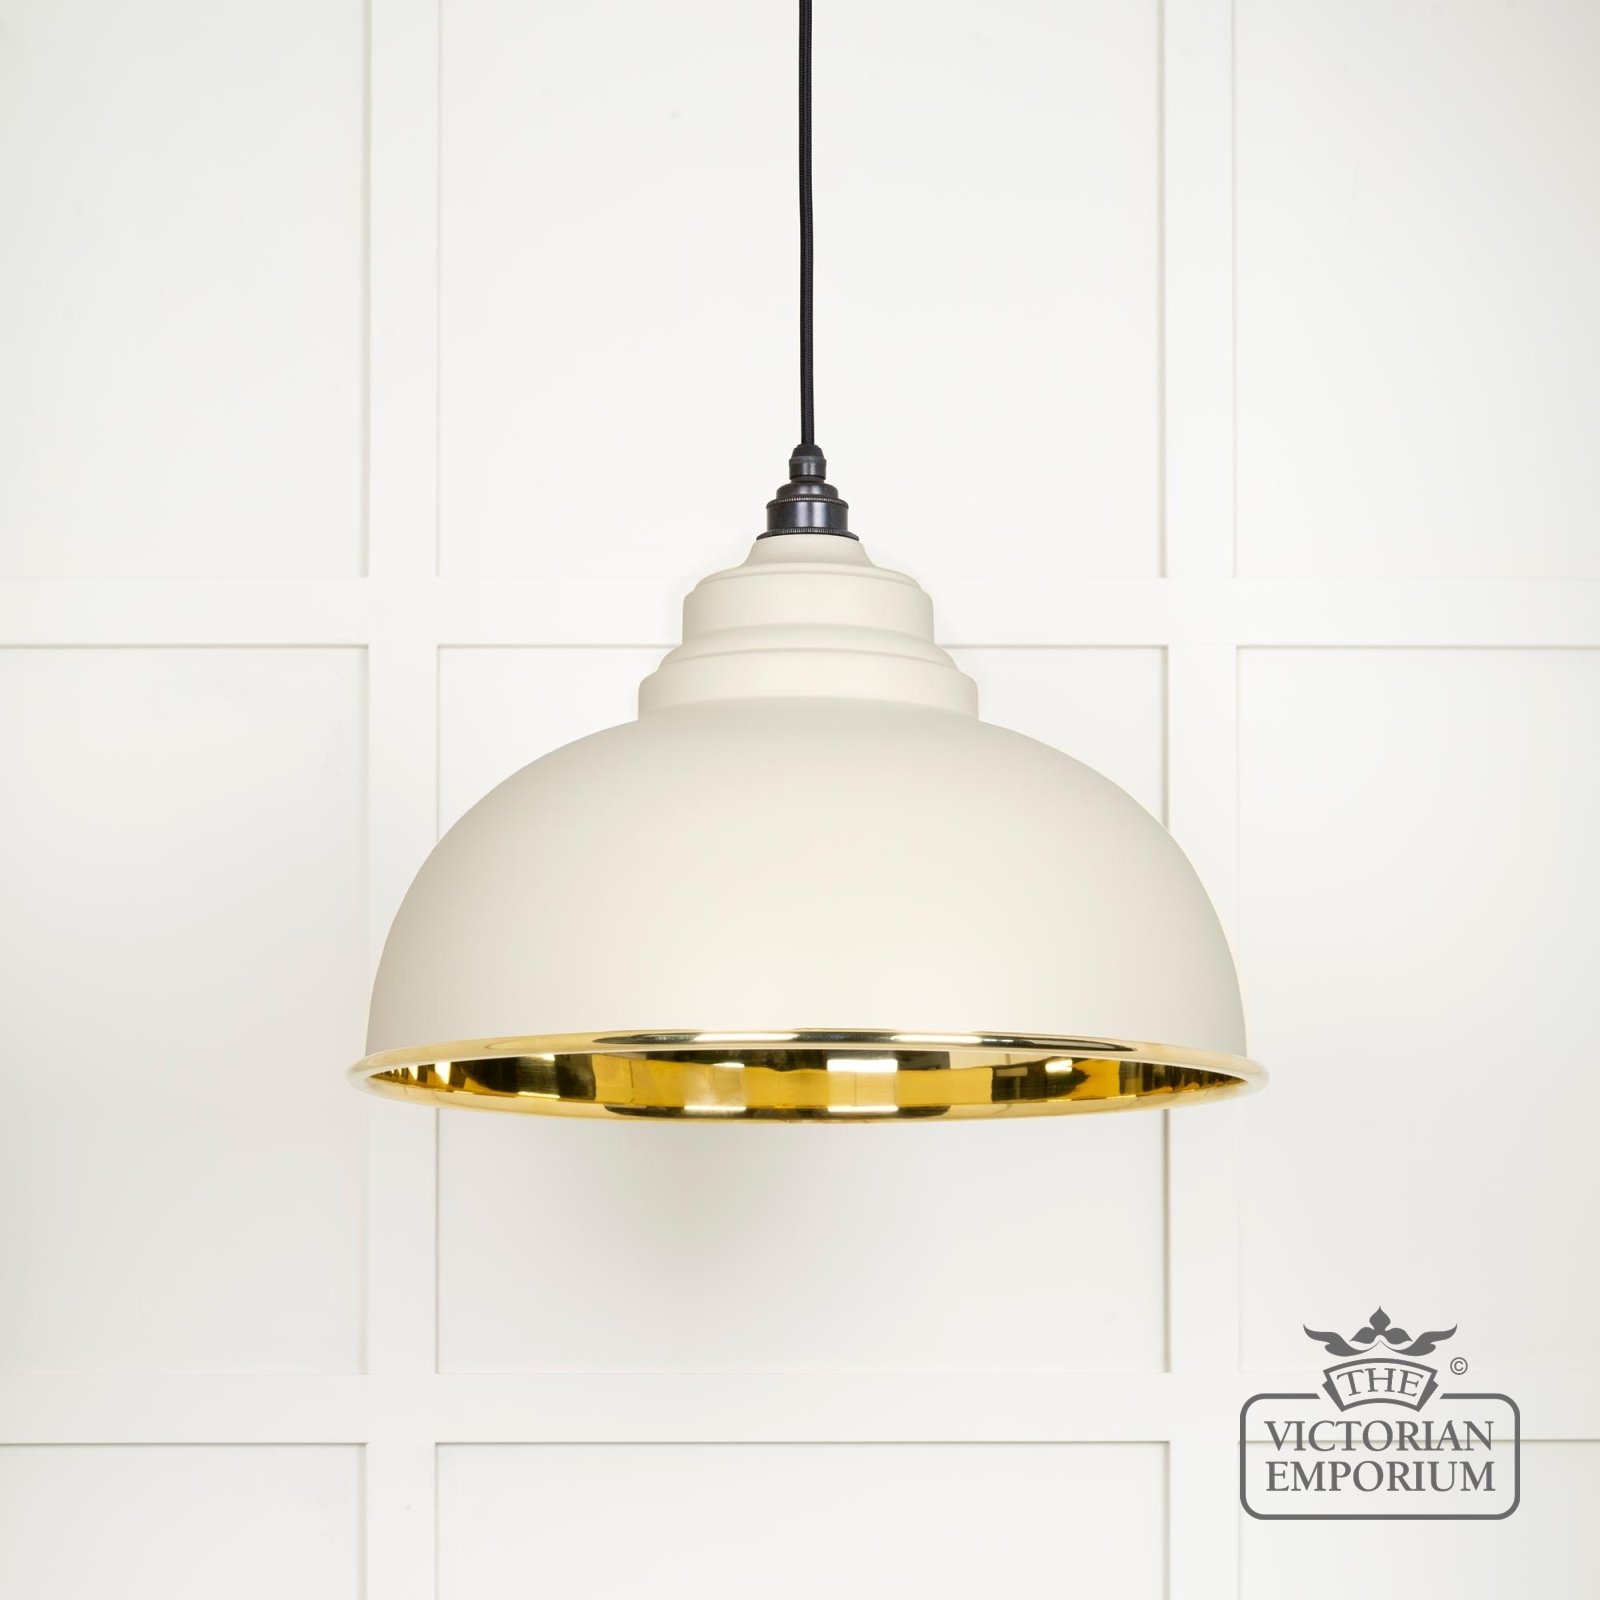 Harlow pendant light in smooth brass with painted Teasel exterior